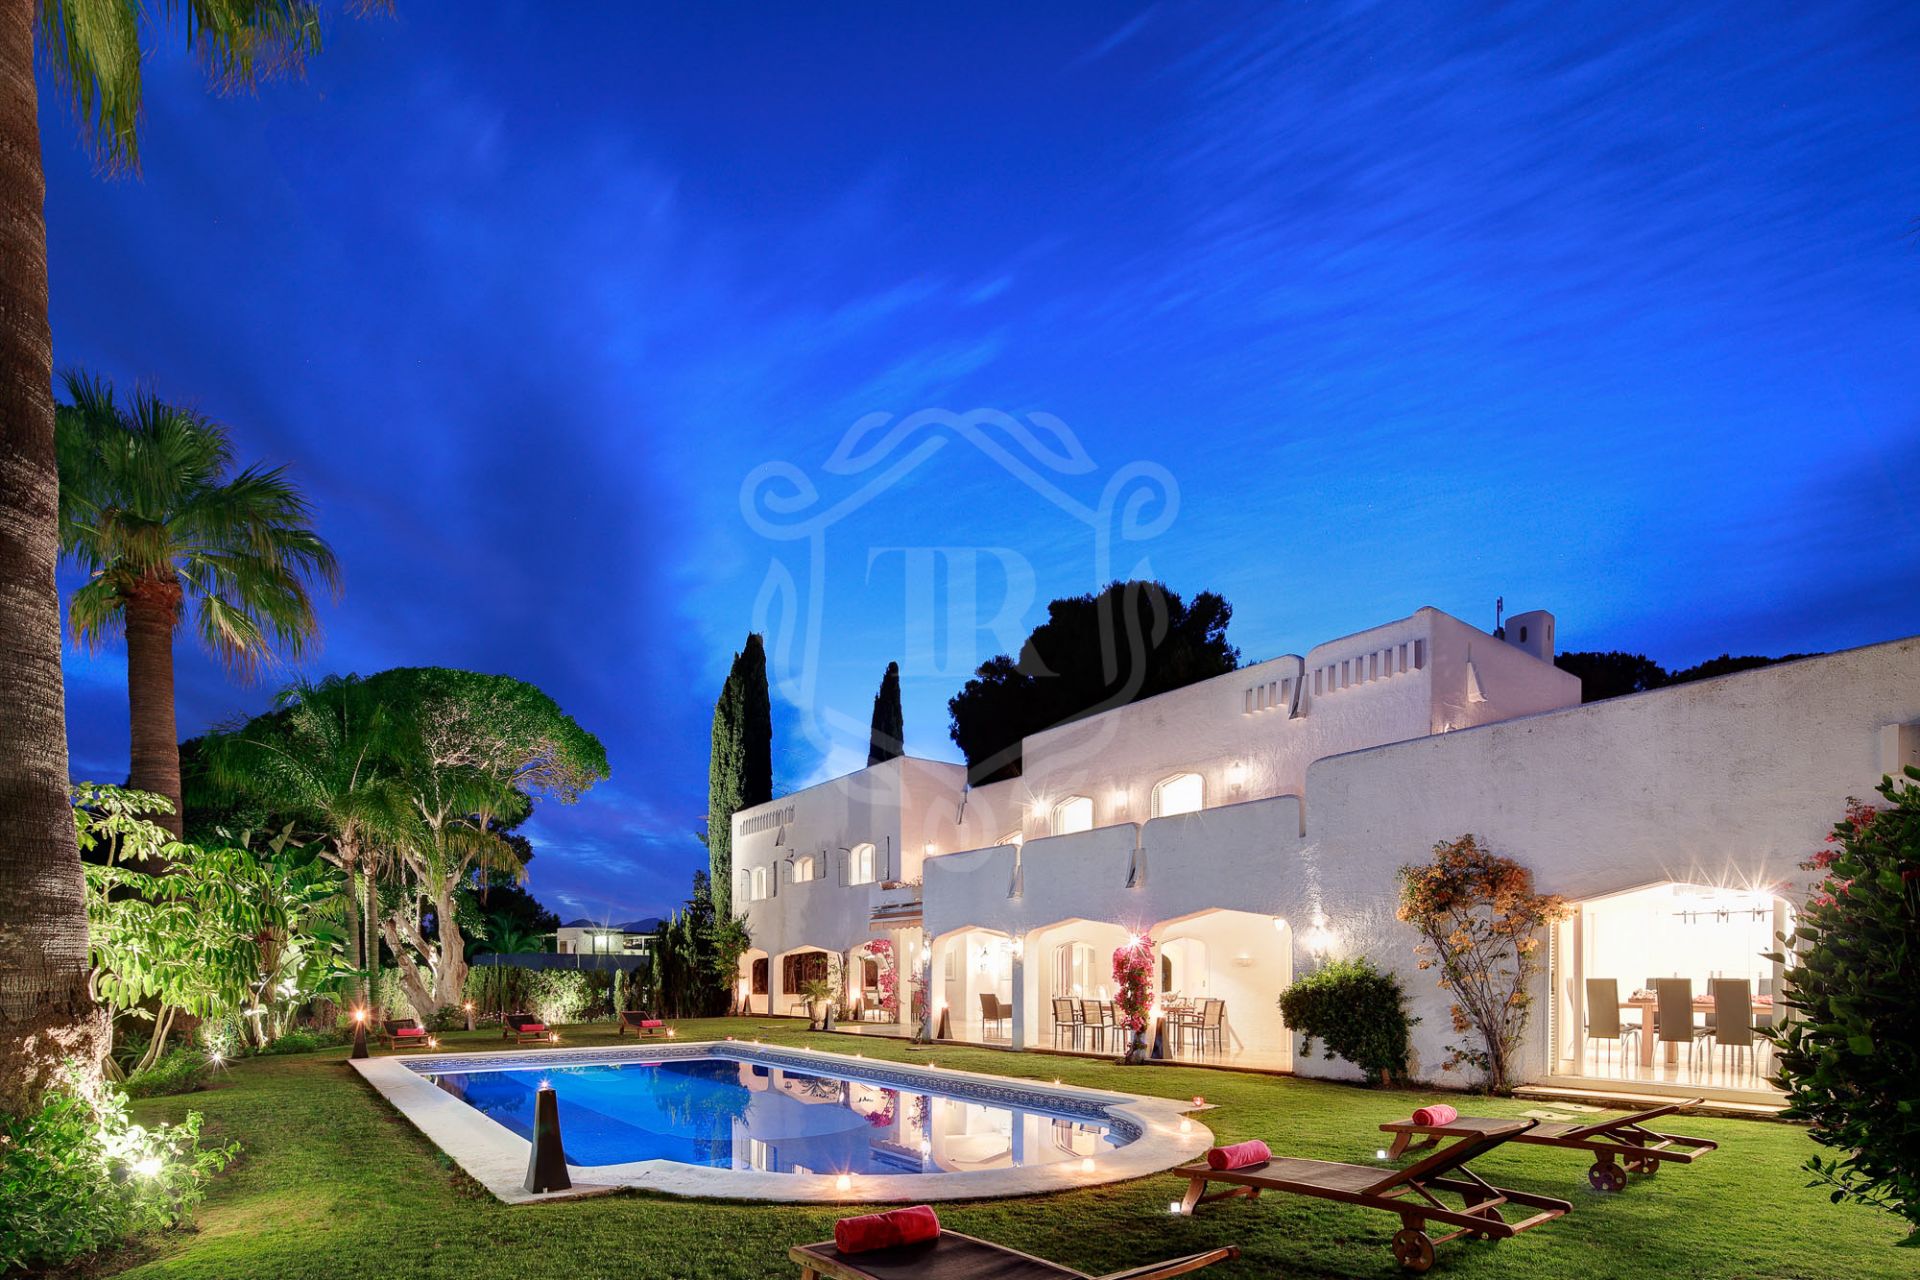 GREAT ANDALUSIAN-MOZARABIC STYLE VILLA, CLOSE TO PUERTO BANÚS